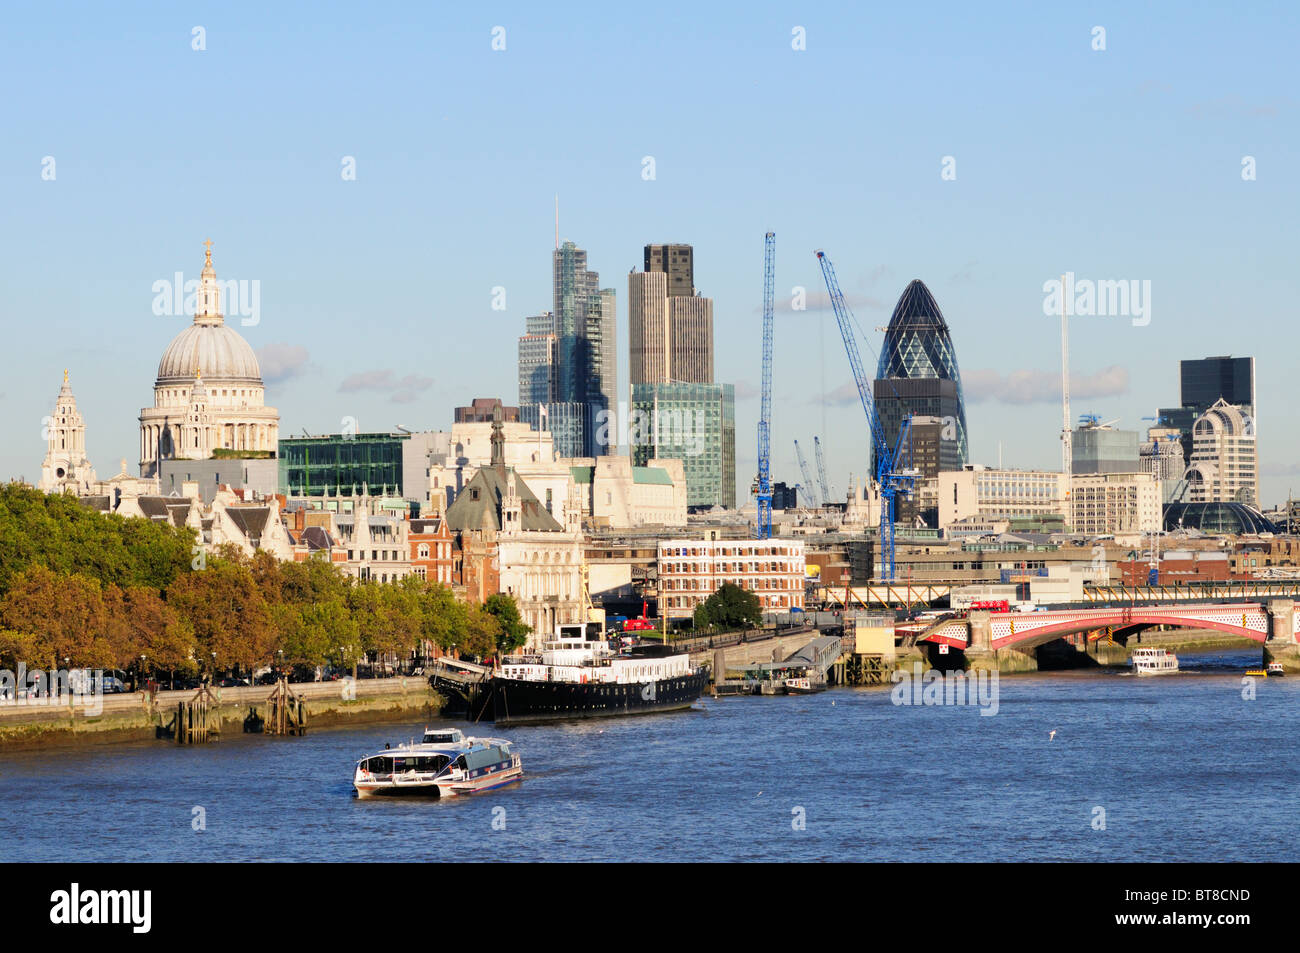 A Thames Clippers riverbus with City of London buildings, view from ...